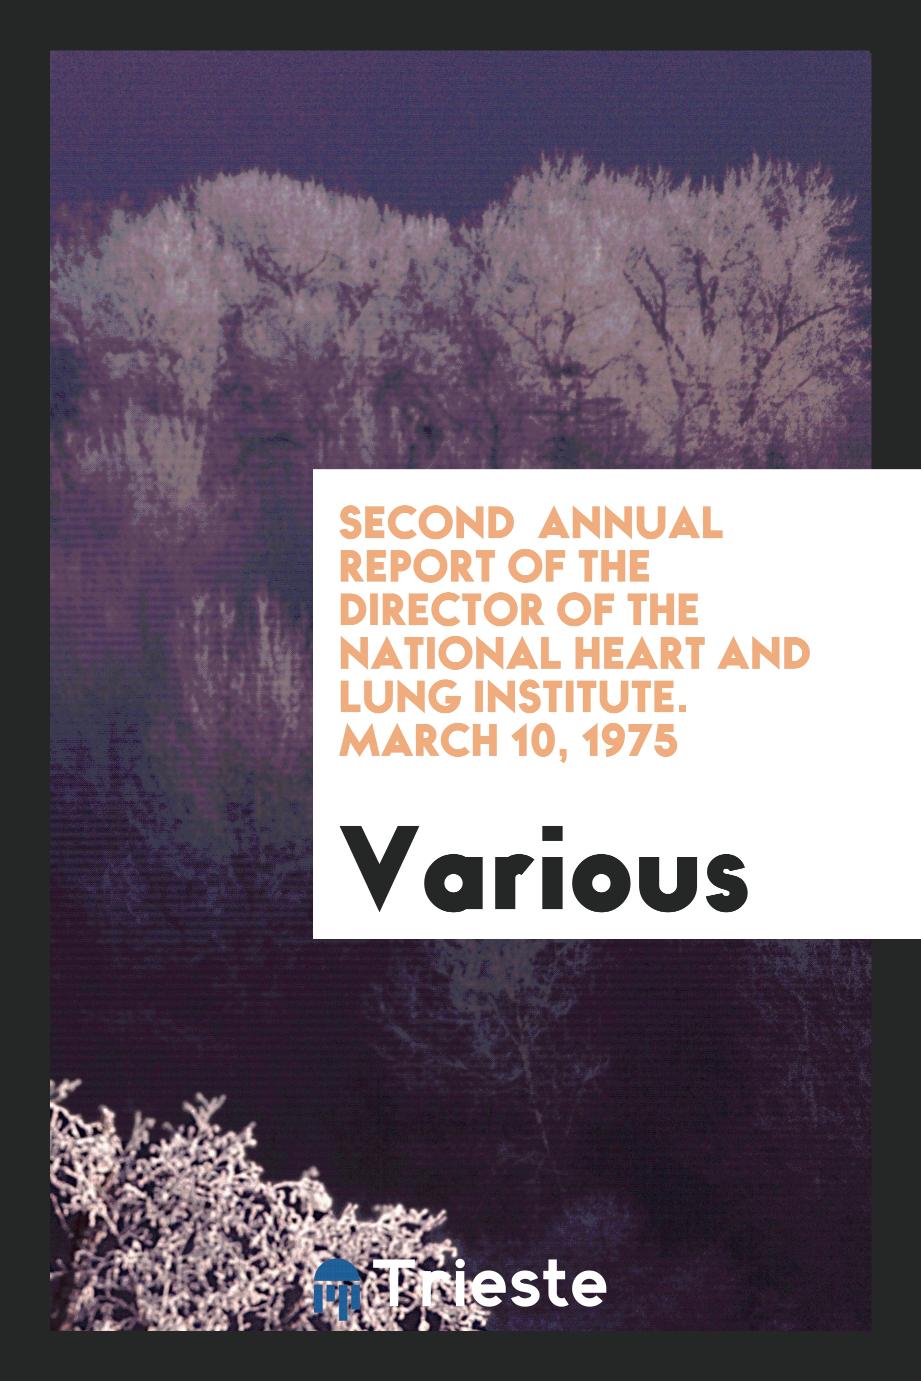 Second annual report of the director of the National Heart and Lung Institute. March 10, 1975